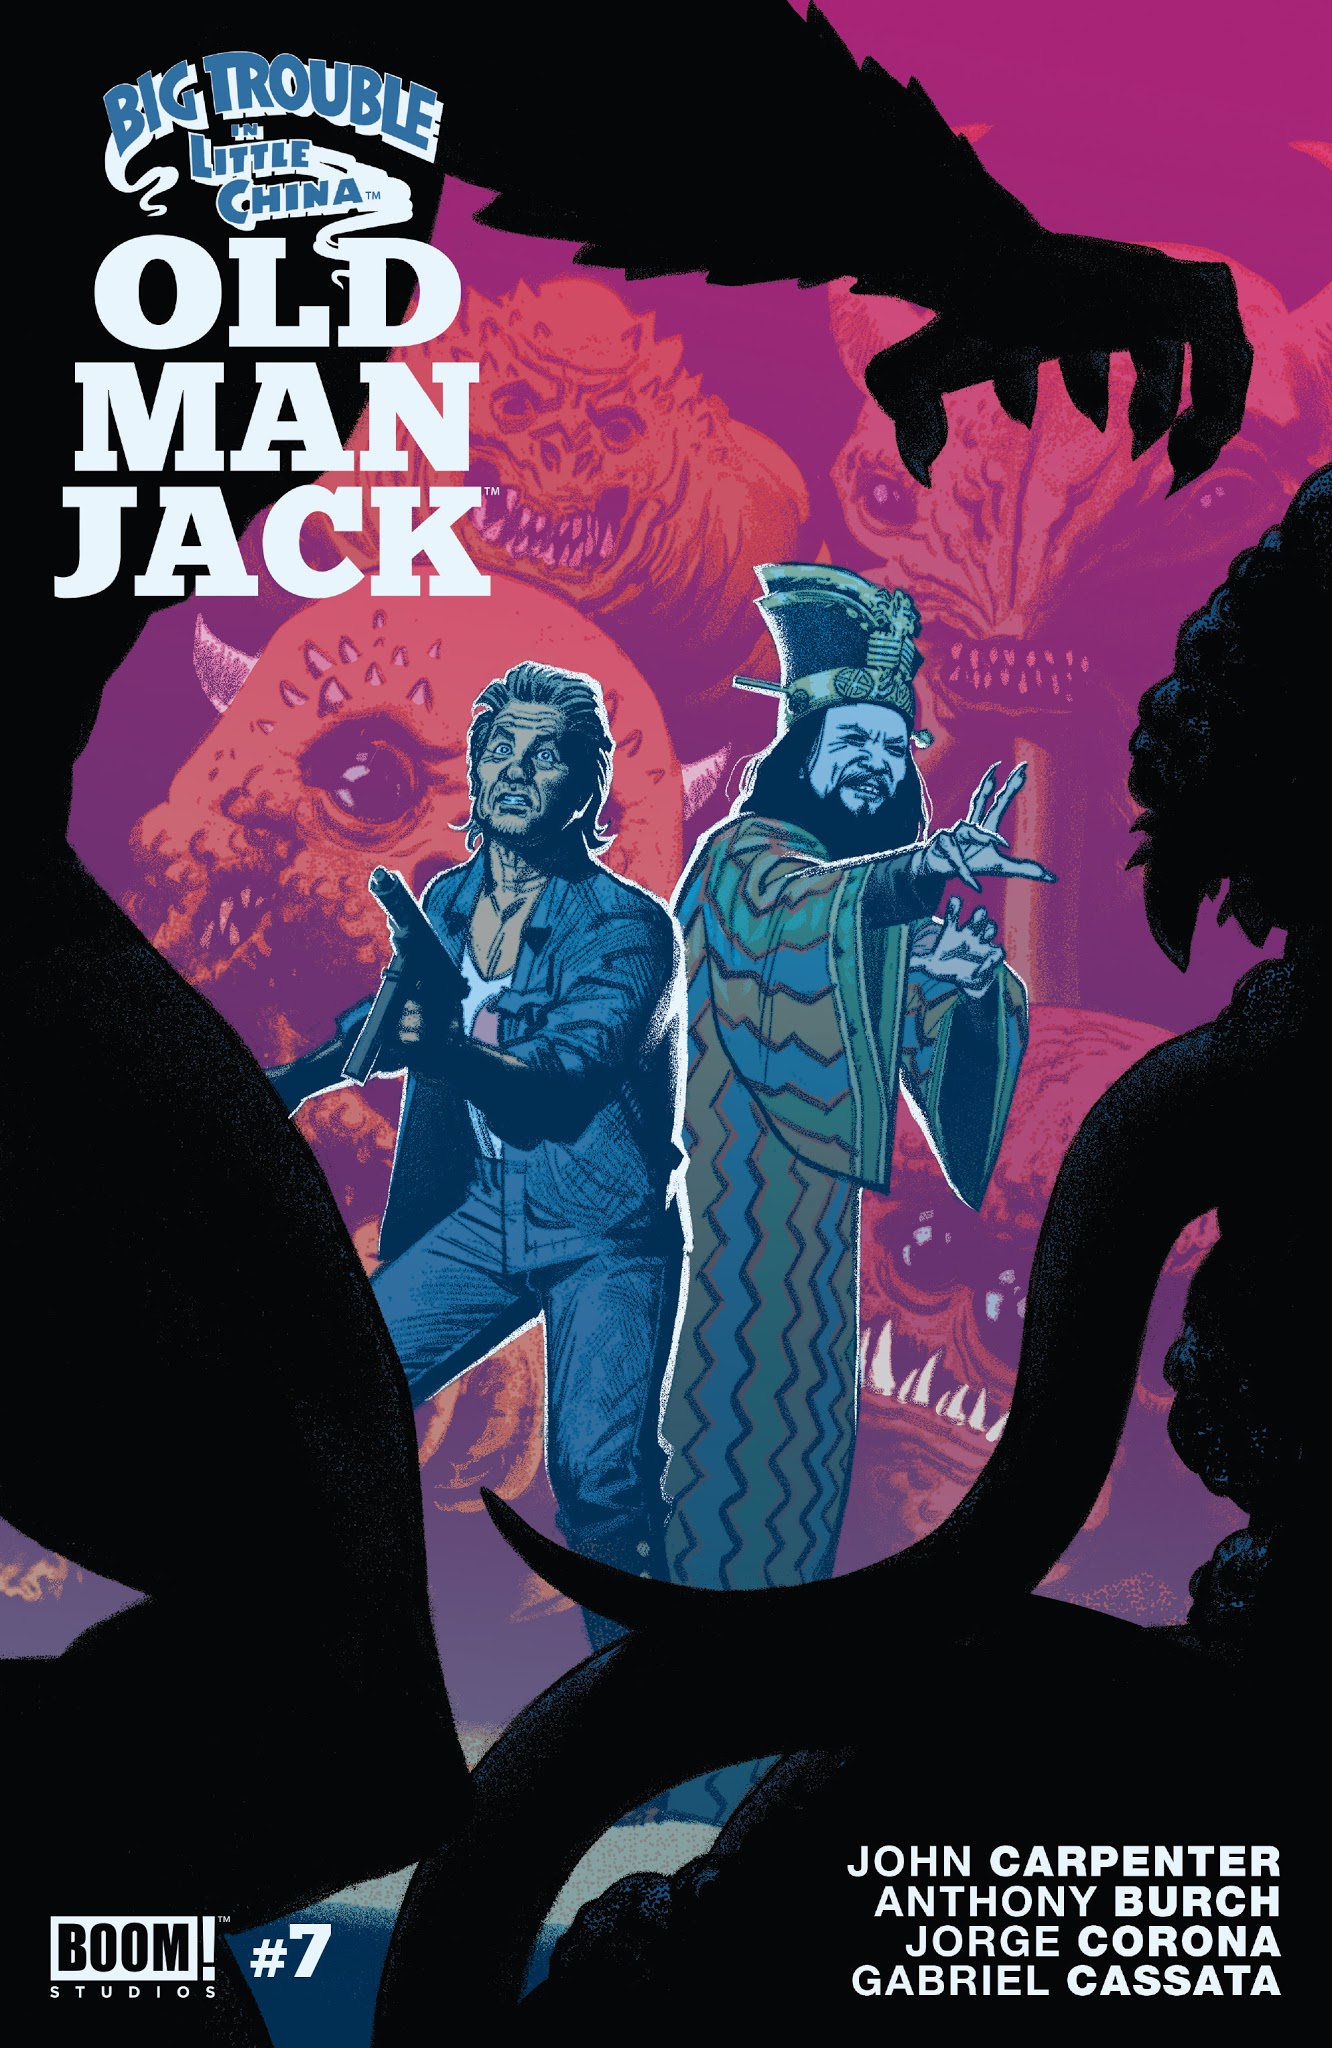 Read online Big Trouble in Little China: Old Man Jack comic -  Issue #7 - 1